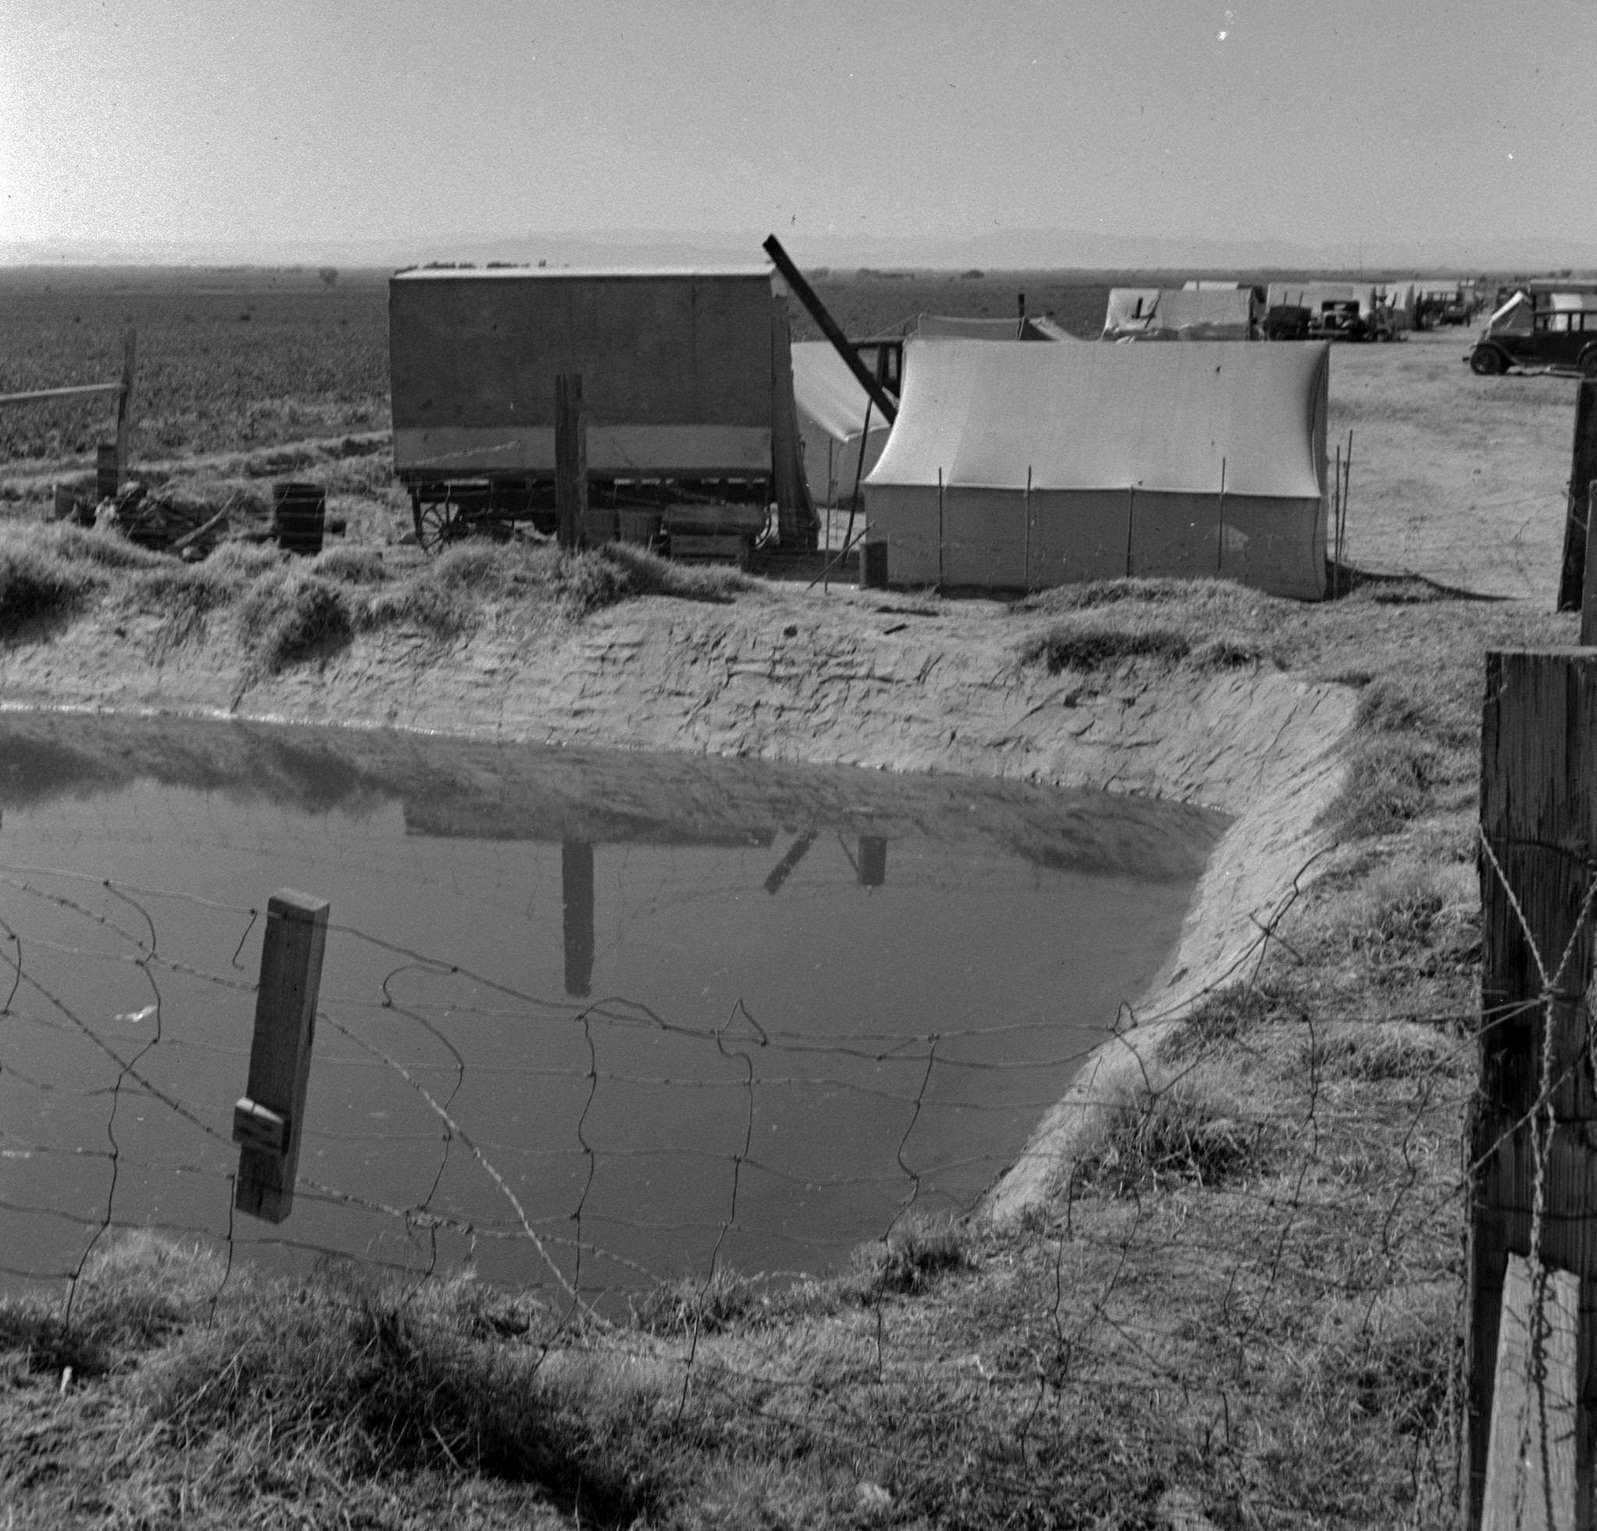 Ditch bank camp for migrant agricultural workers. California, 1937